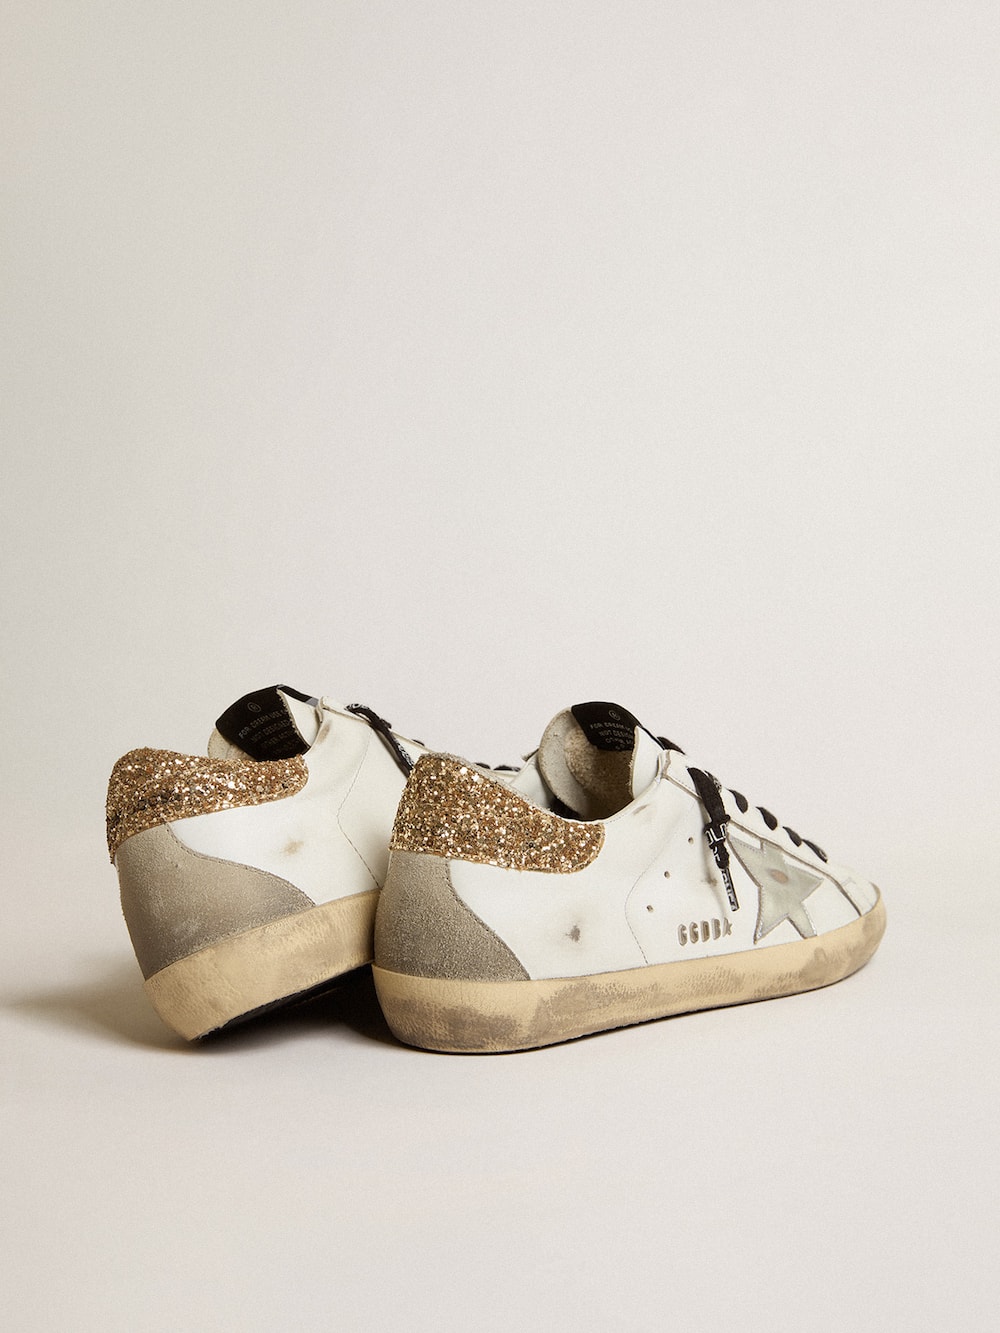 Golden Goose - Sneakers Super-Star Donna bianche in pelle con talloncino glitter in 